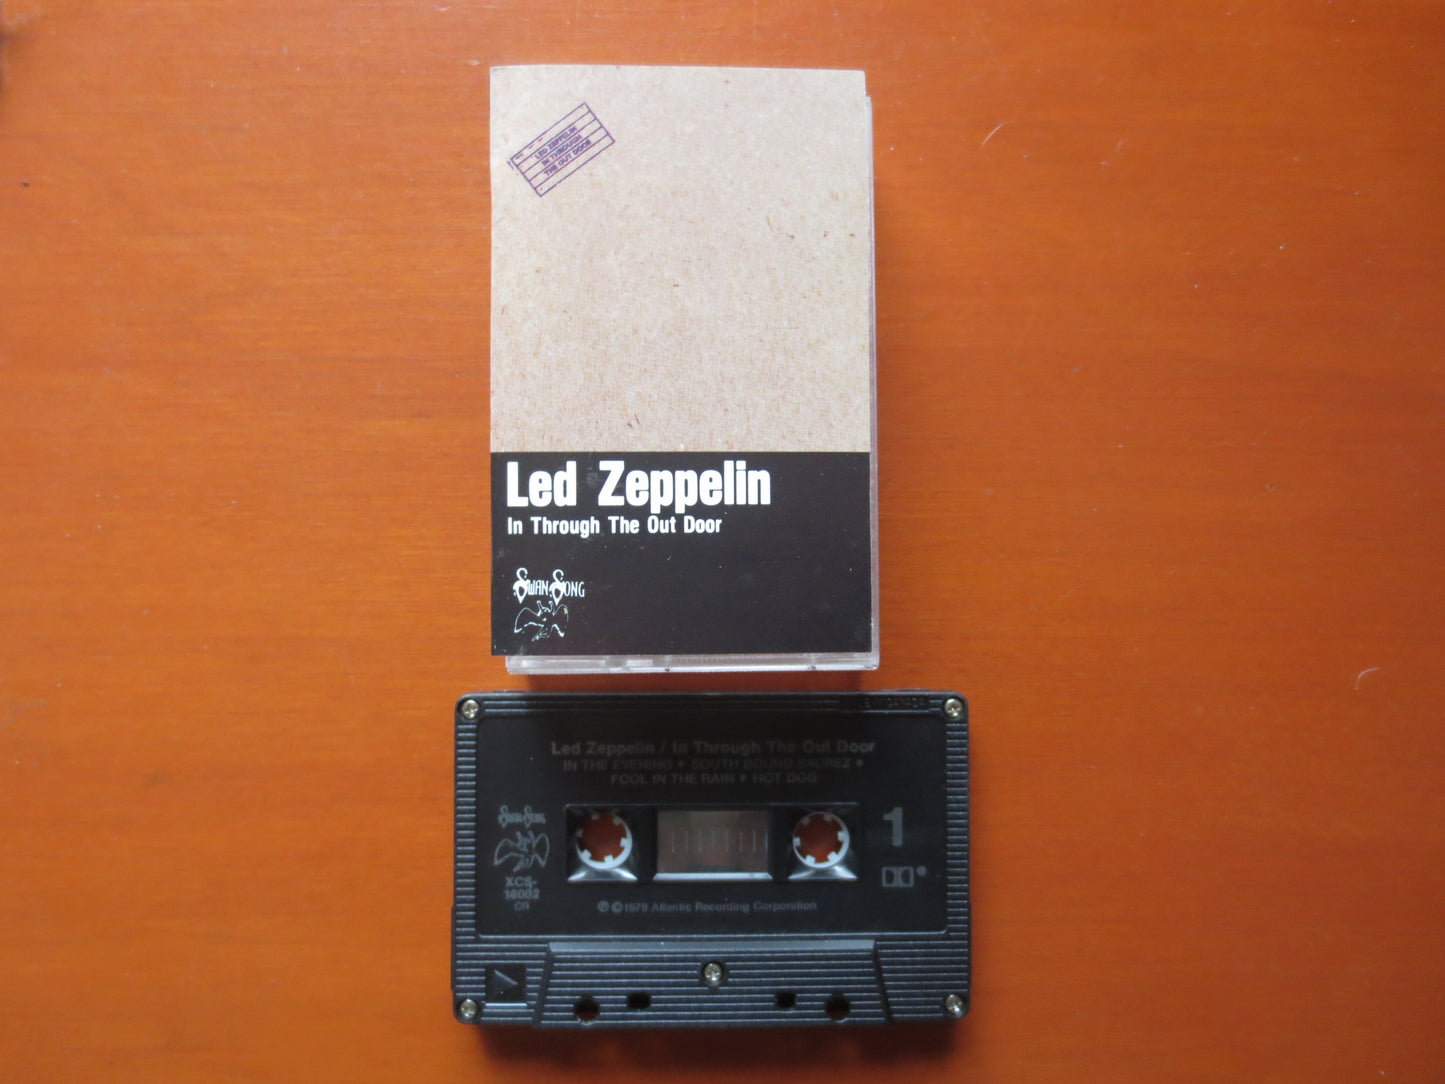 Led ZEPPELIN Tape, In Through the Out Door, Led ZEPPELIN Album, Led Zeppelin Music, Tape Cassette, Cassette, 1979 Cassette